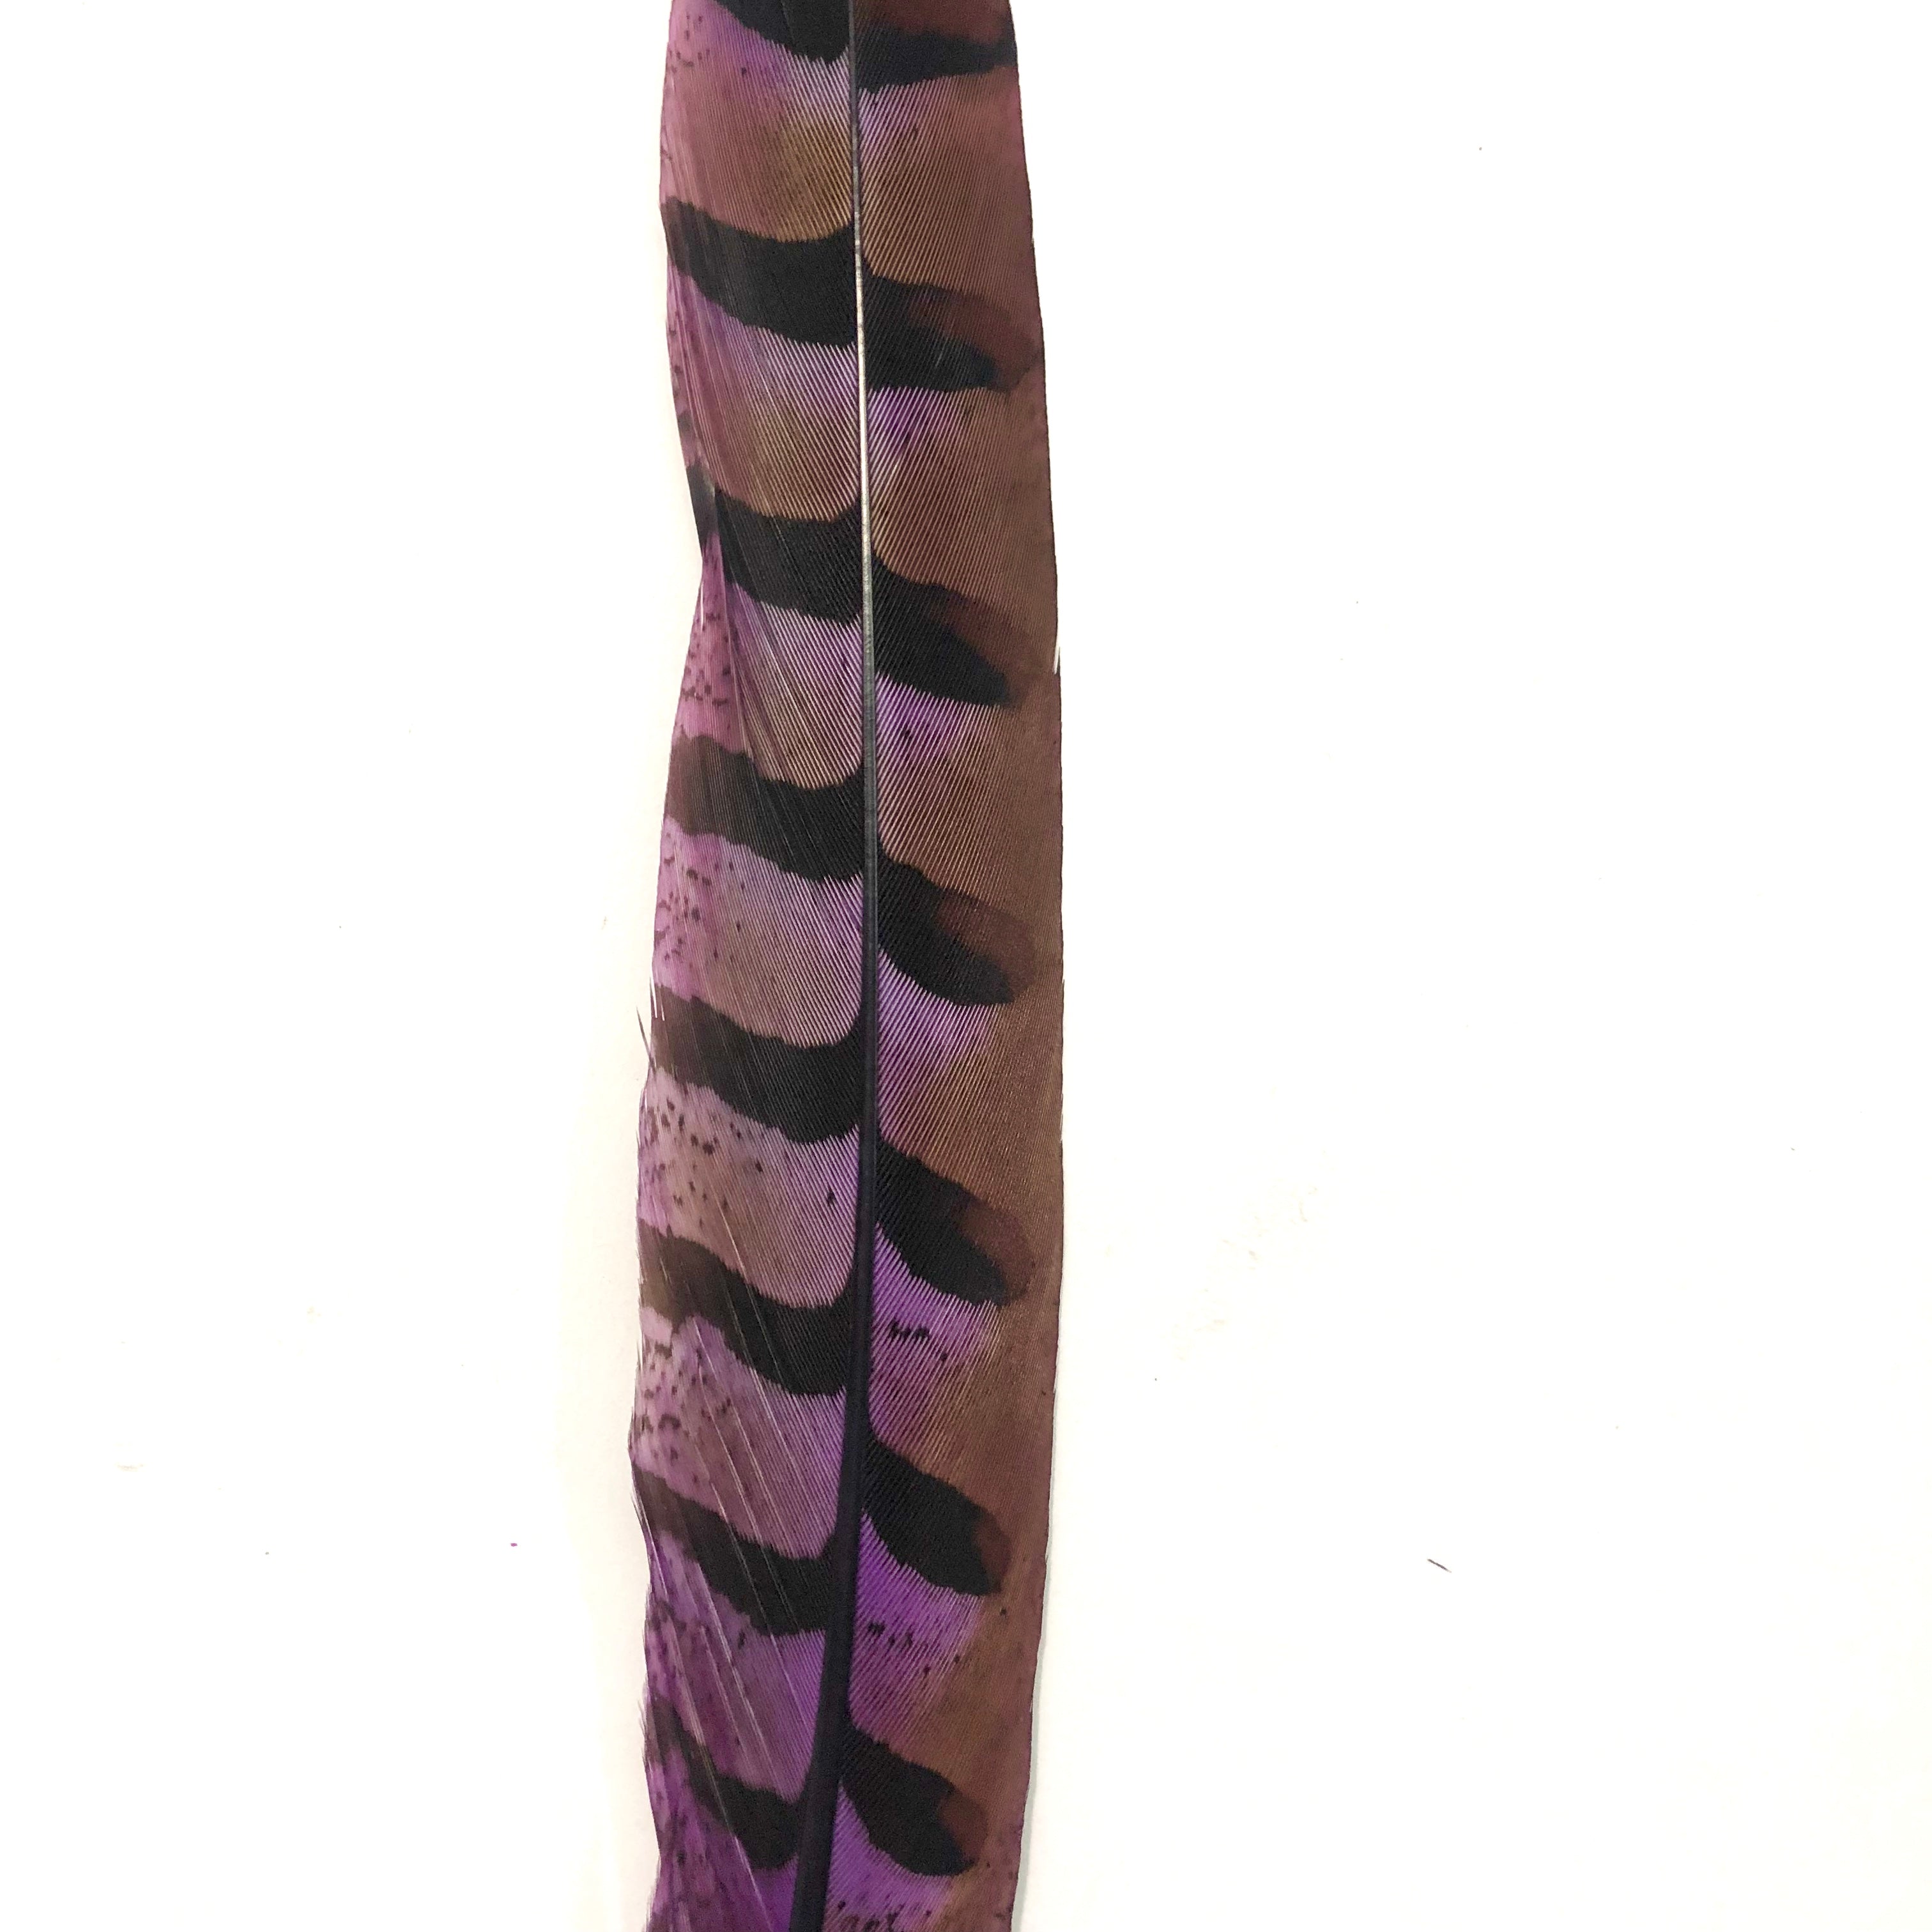 12" to 14" Reeves Pheasant Tail Feather - Purple ((SECONDS))